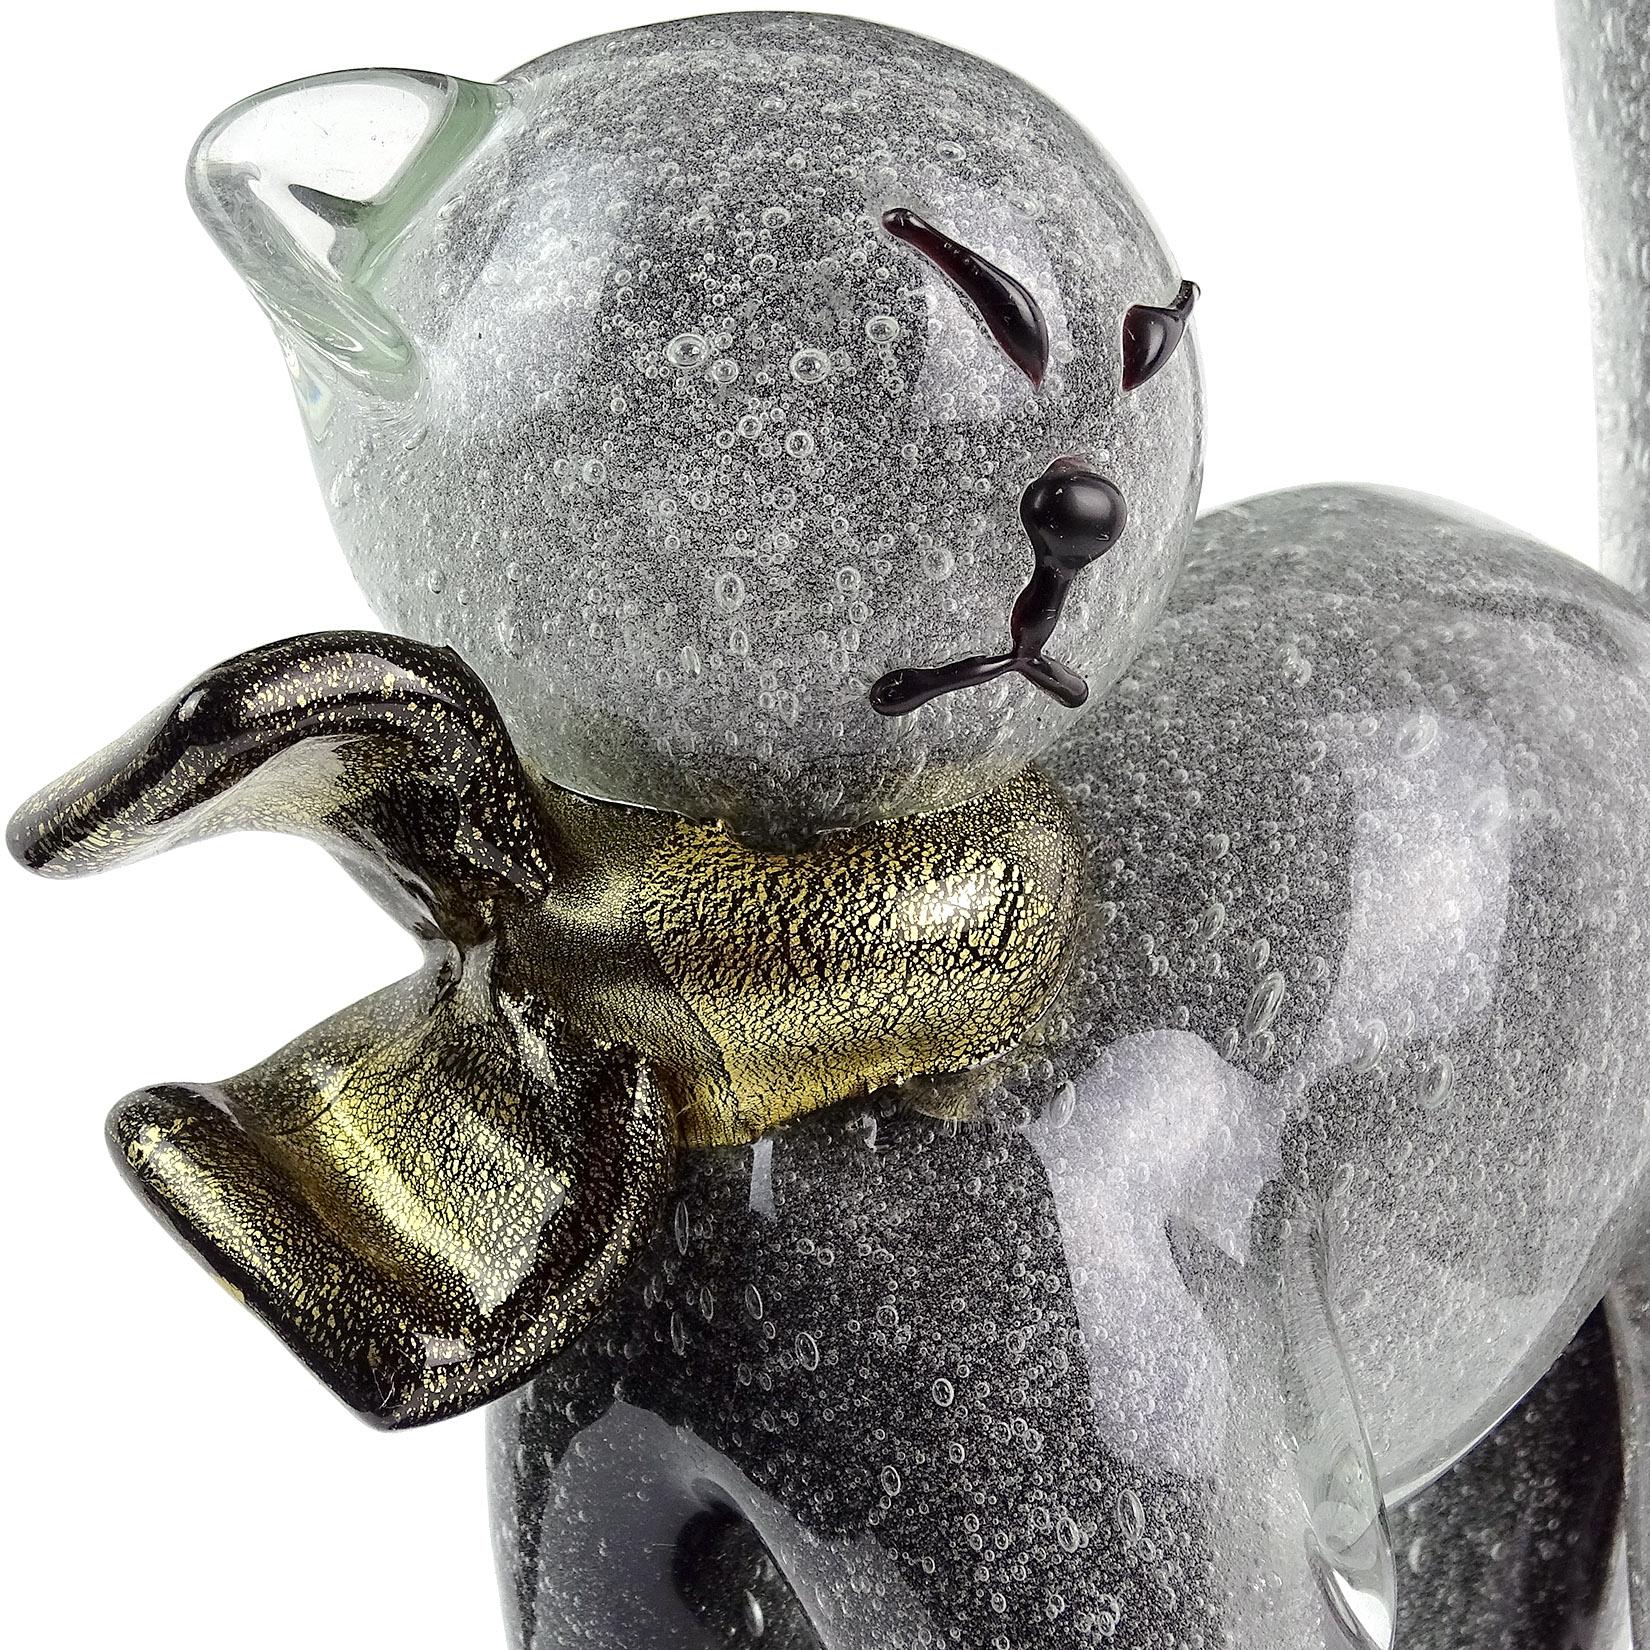 Beautiful vintage Murano hand blown Pulegoso bubbles, over black core and gold flecks Italian art glass kitty cat sculpture. Documented to designer Alfredo Barbini, circa 1950s. The cat stands on a large black base, and looks to be stretching or